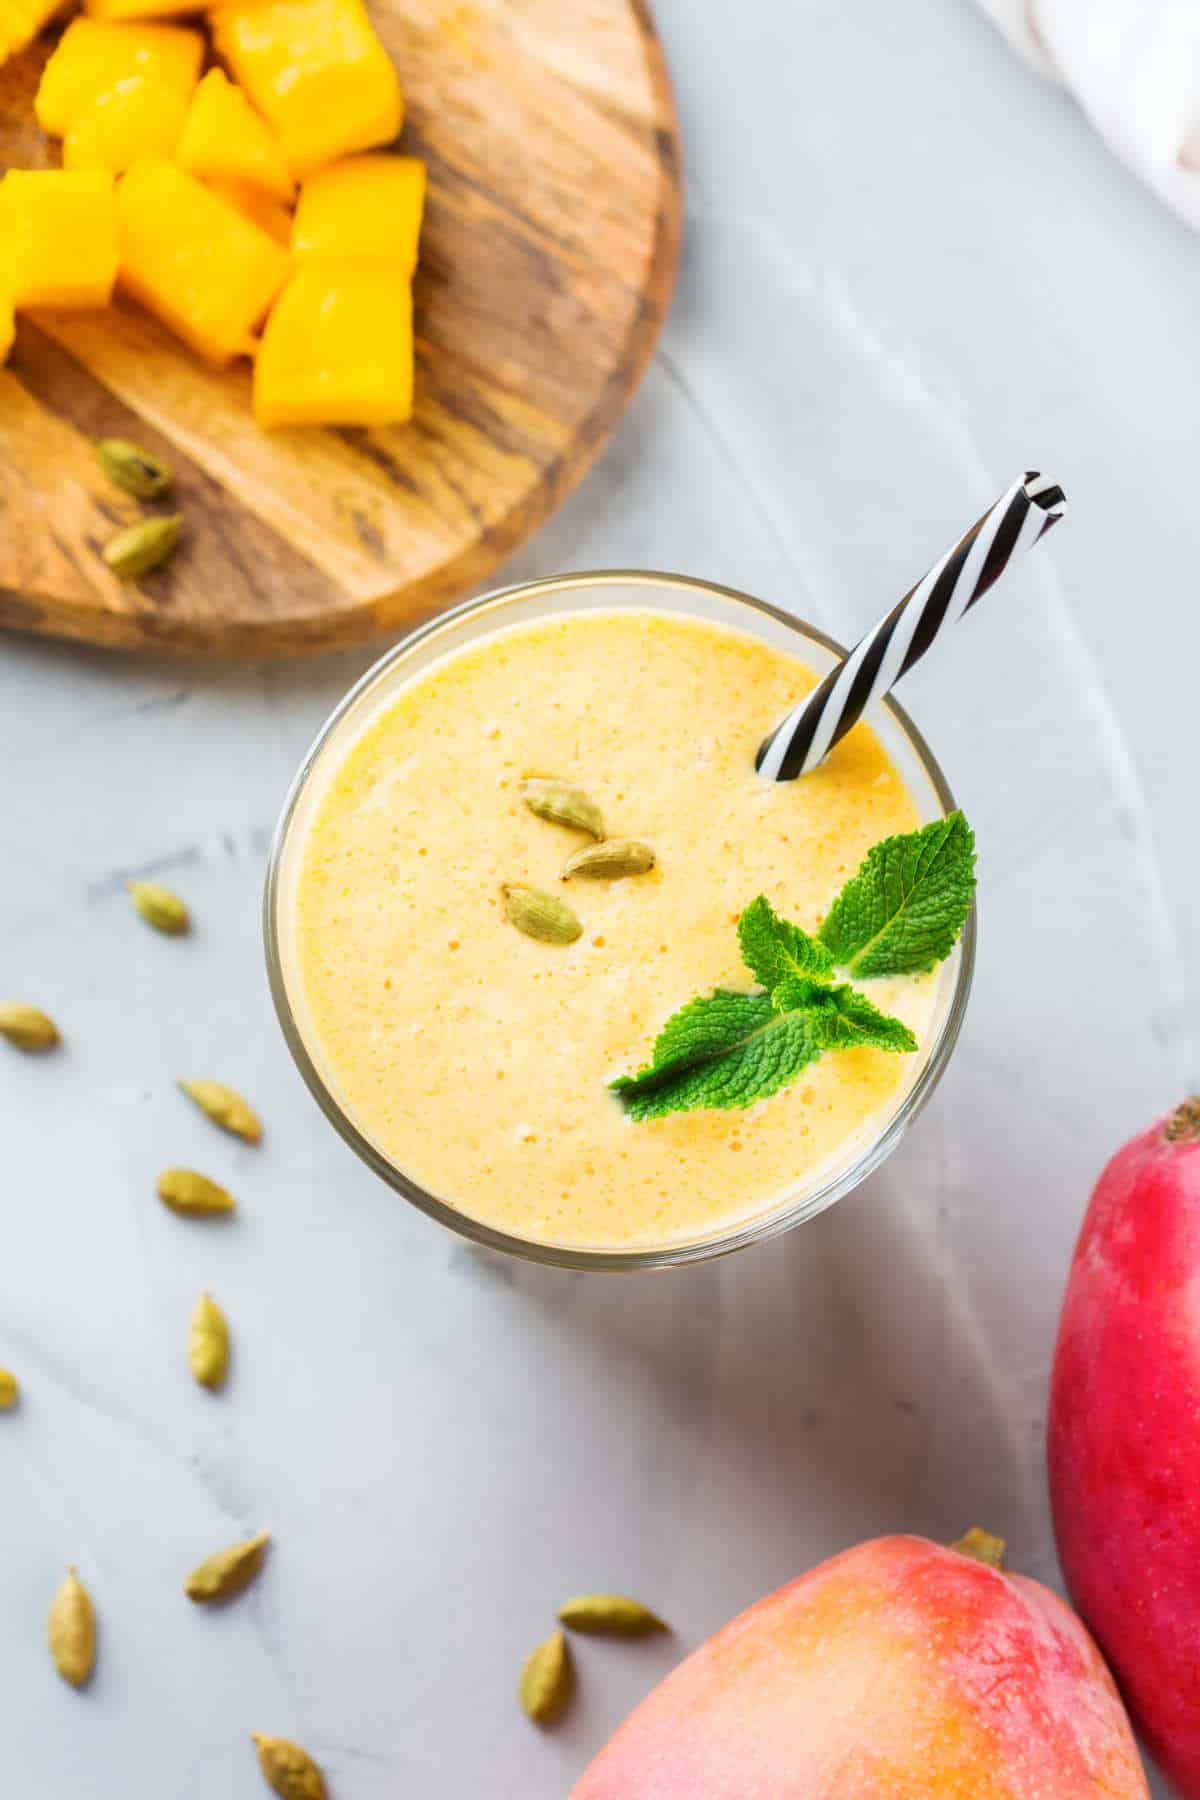 Healthy organic mango lassi, smoothie, shake, indian drink beverage with yogurt and fresh ripe fruits on a kitchen table.